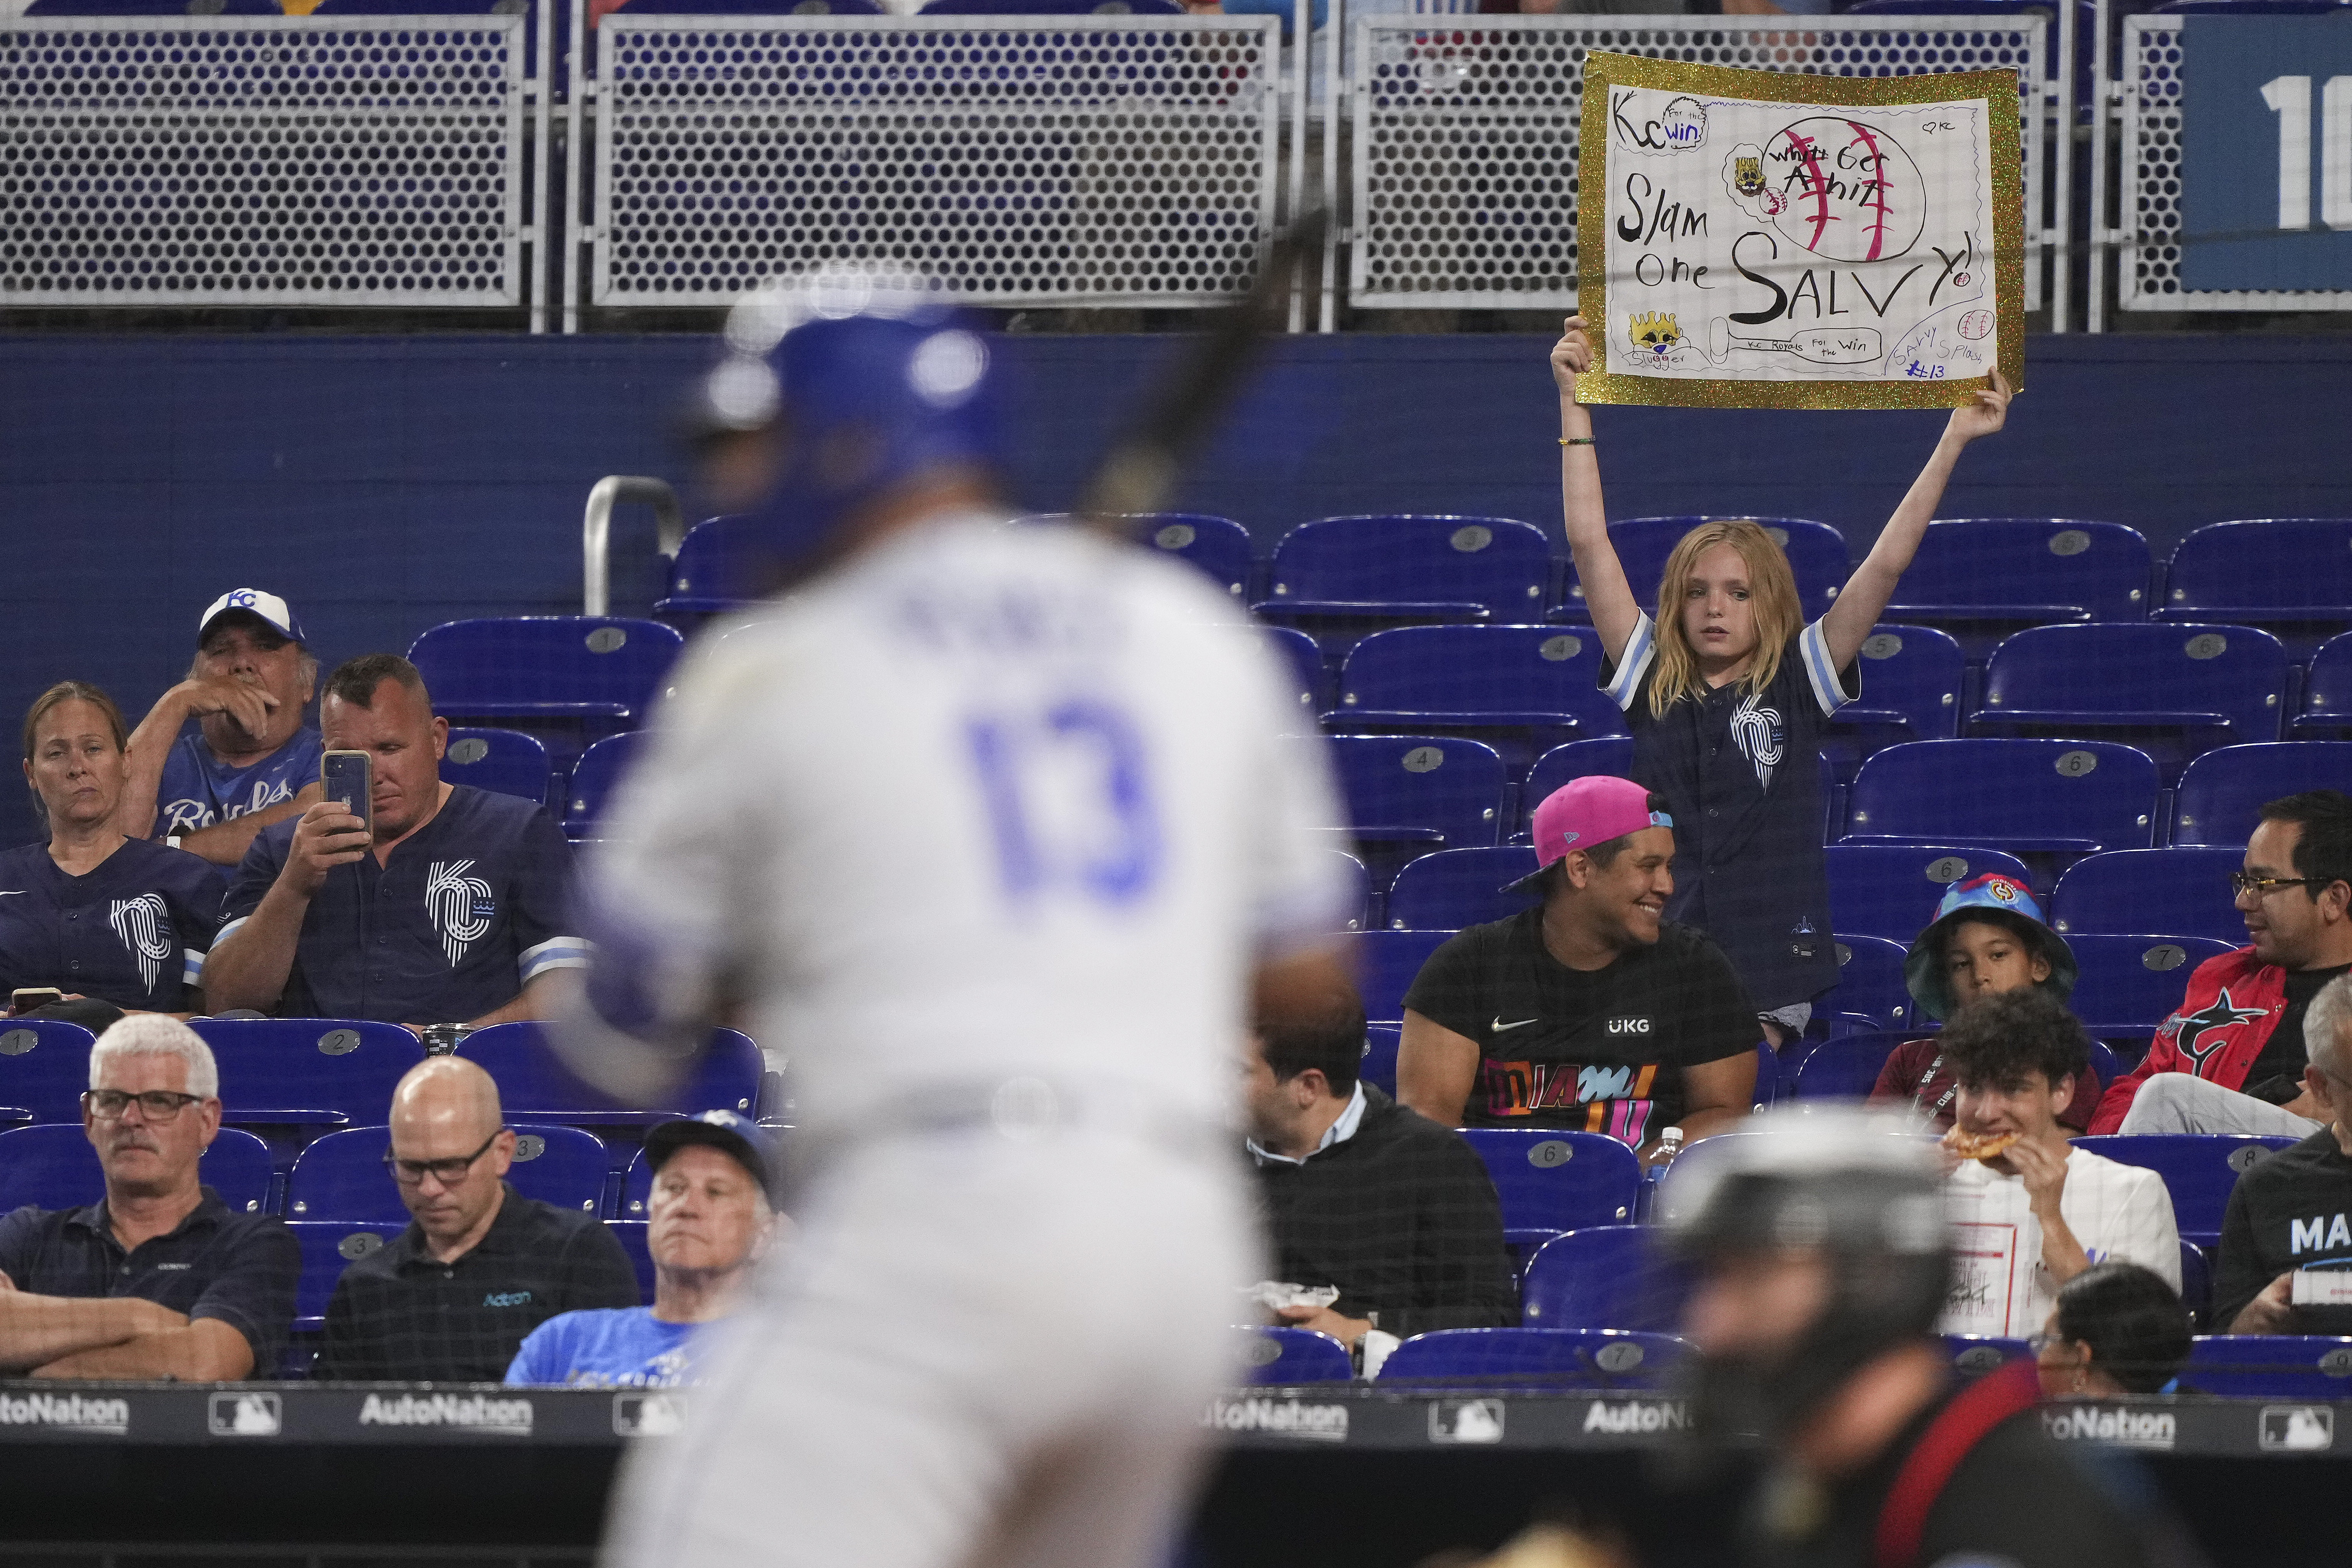 Salvador Perez stands at the plate while a fan holds a sign in the background